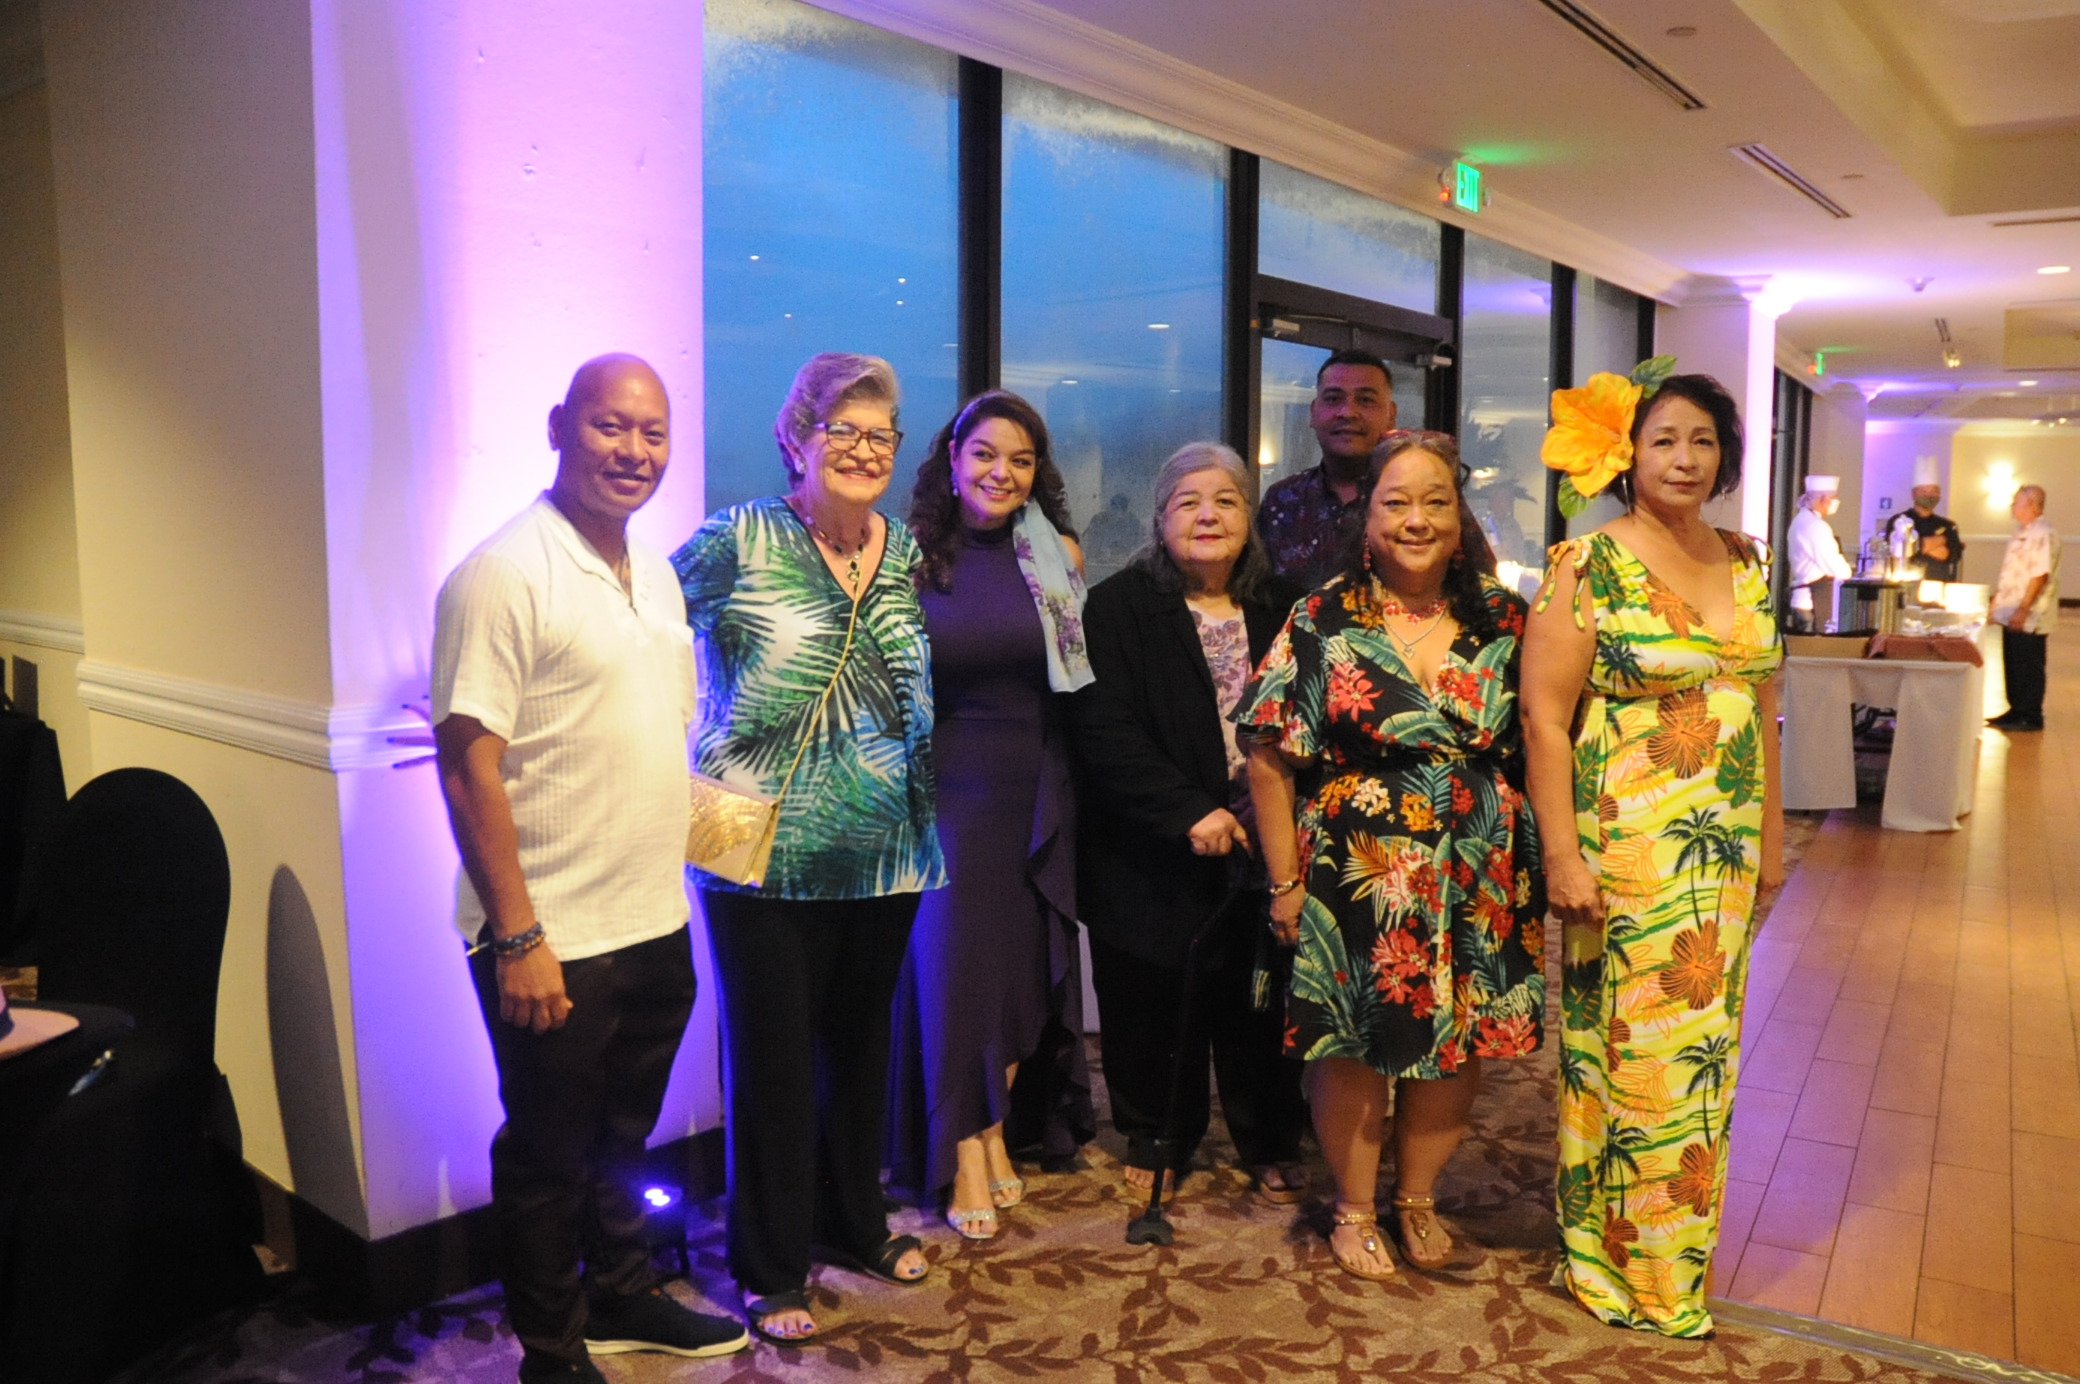 (from left) Delbert Calvo, member at large; Karen Carpenter, office manager; Louise Borja, president; Gloria Borja, Volunteer Support chairwoman and mother of Louise; Jon Mendiola, public information officer; Odilia Taitano-Jaime, psychiatric technician at the Guam Behavioral Health and Wellness Center, treasurer; and Julie Ulloa-Heath, executive director, all with VARO.